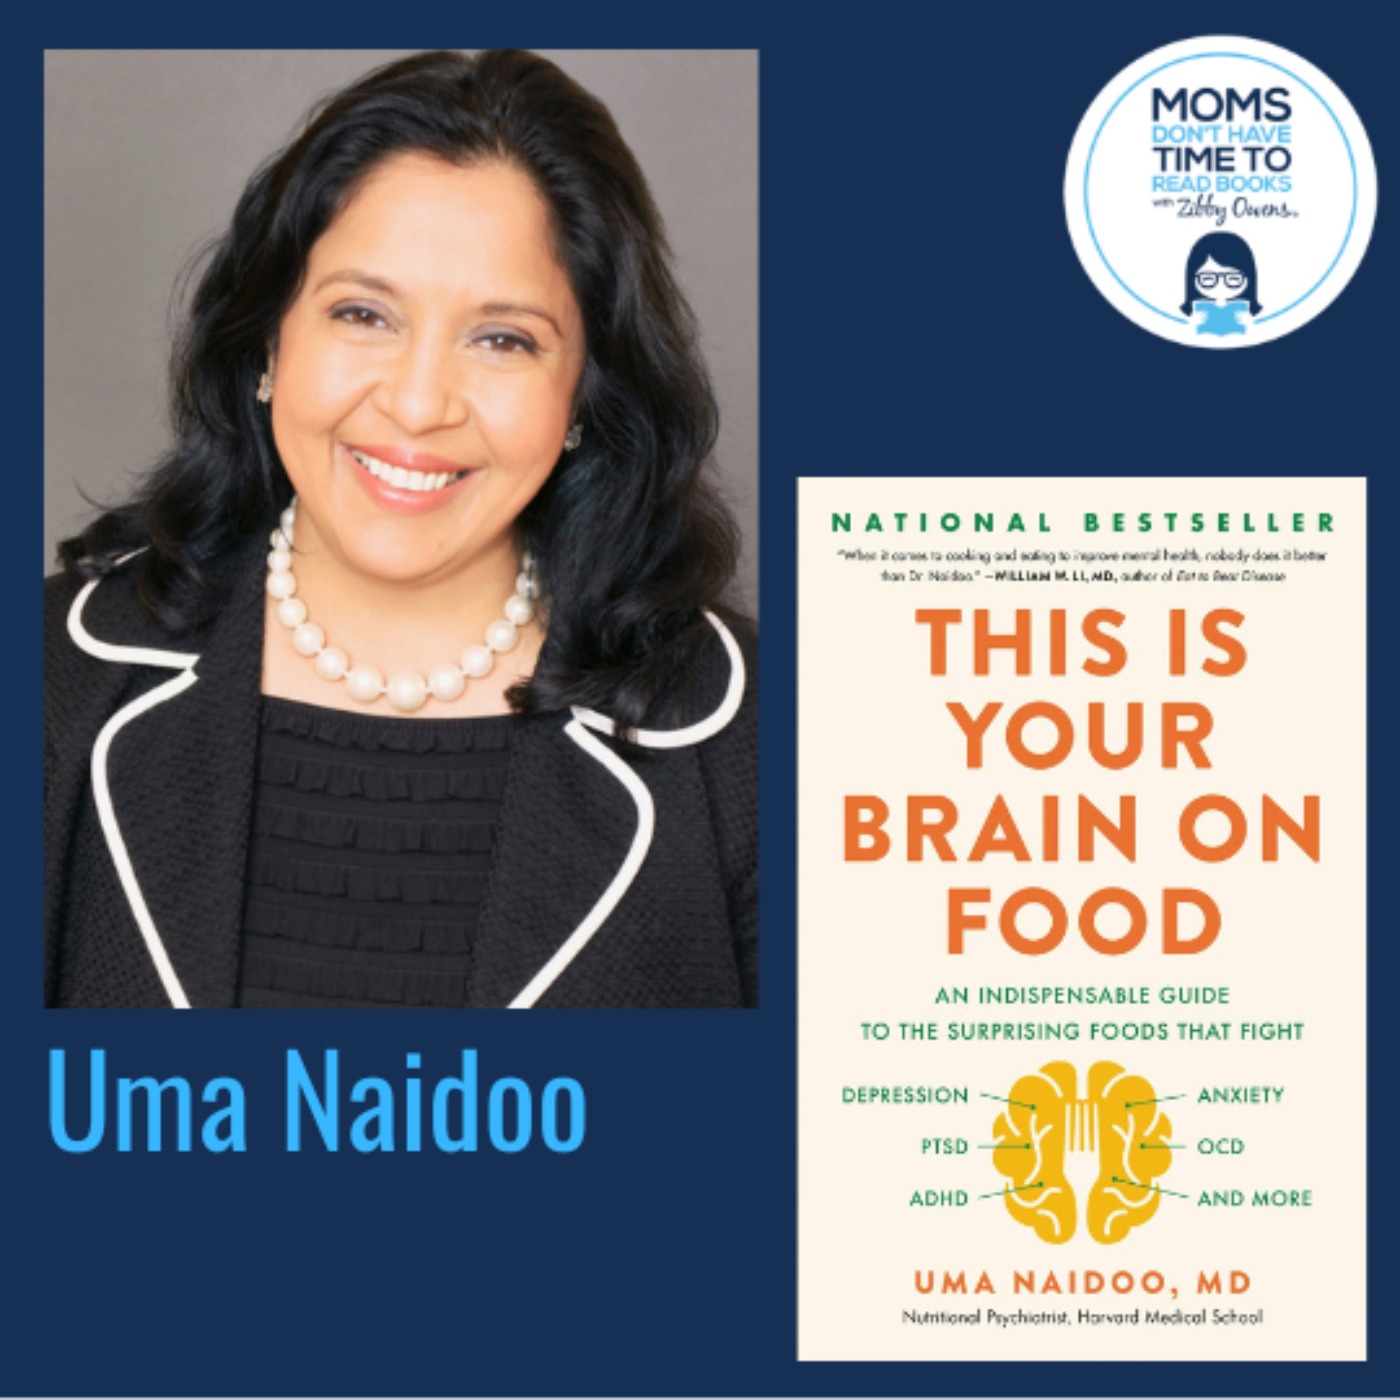 Uma Naidoo MD, THIS IS YOUR BRAIN ON FOOD: An Indispensable Guide to the Surprising Foods that Fight Depression, Anxiety, PTSD, OCD, ADHD, and More